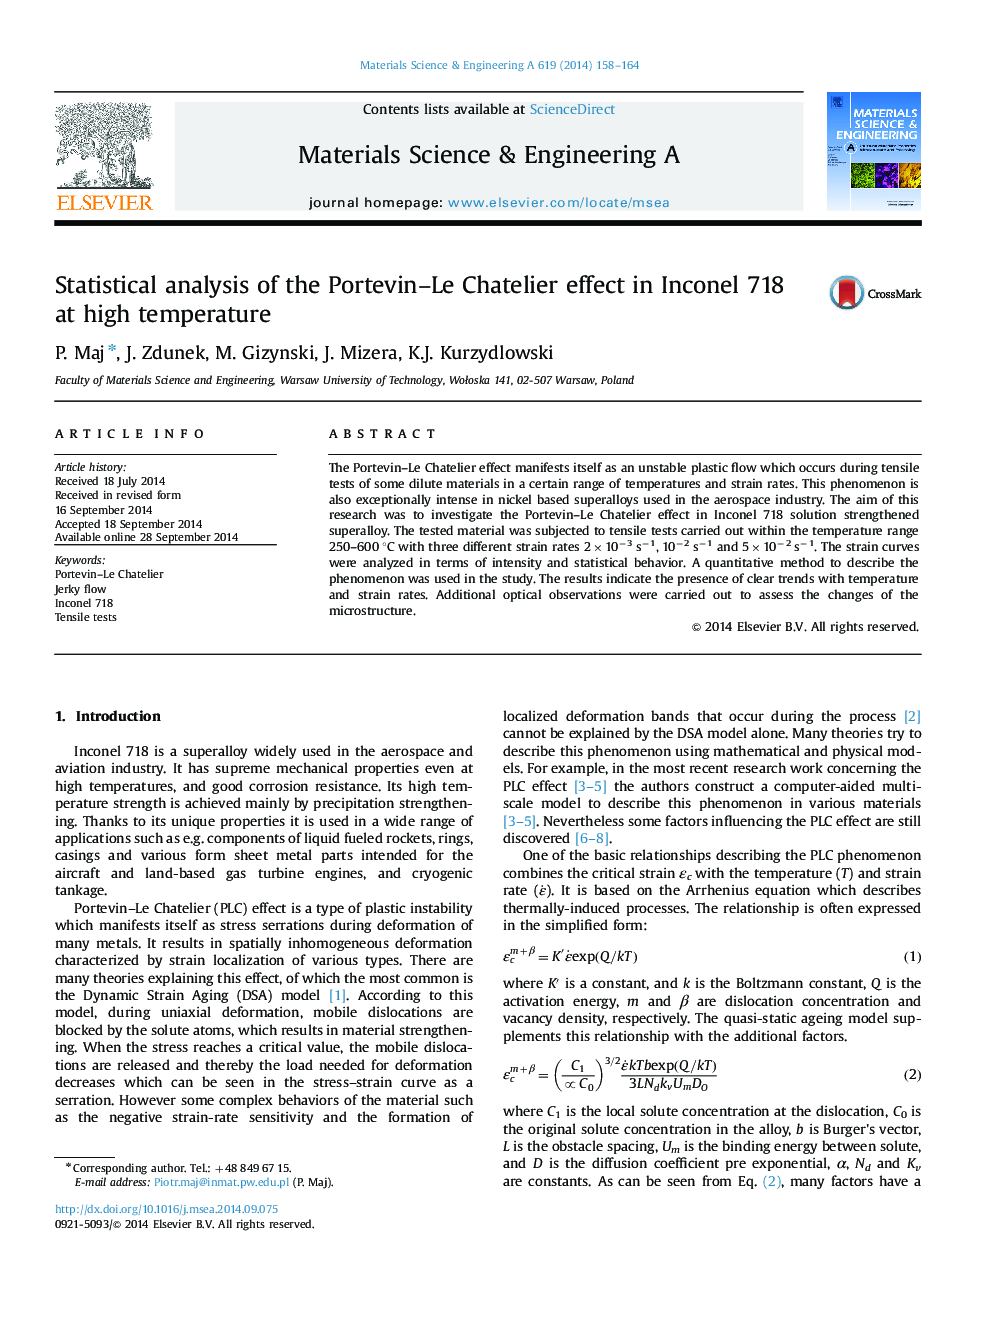 Statistical analysis of the Portevin-Le Chatelier effect in Inconel 718 at high temperature